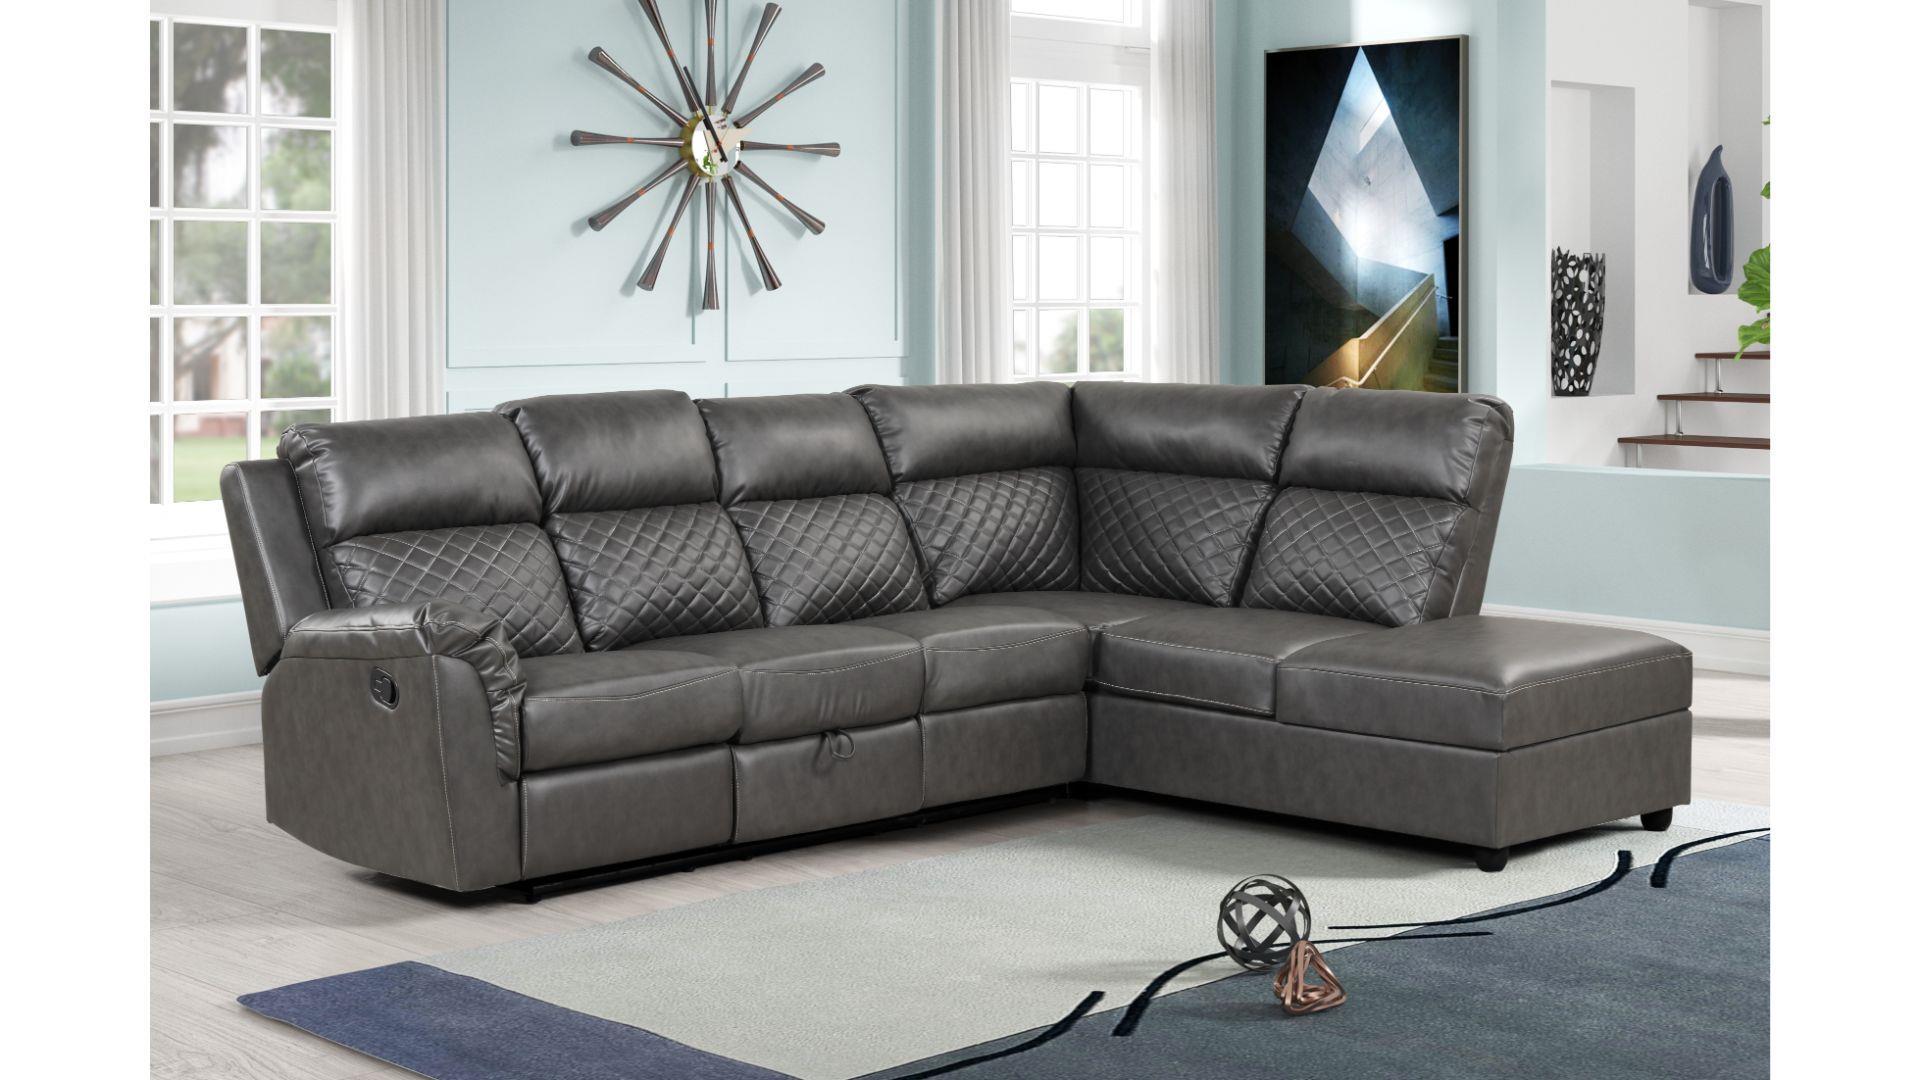 Contemporary, Modern Recliner Sectional CHARLOTTE-GR CHARLOTTE-GR in Gray Eco Leather